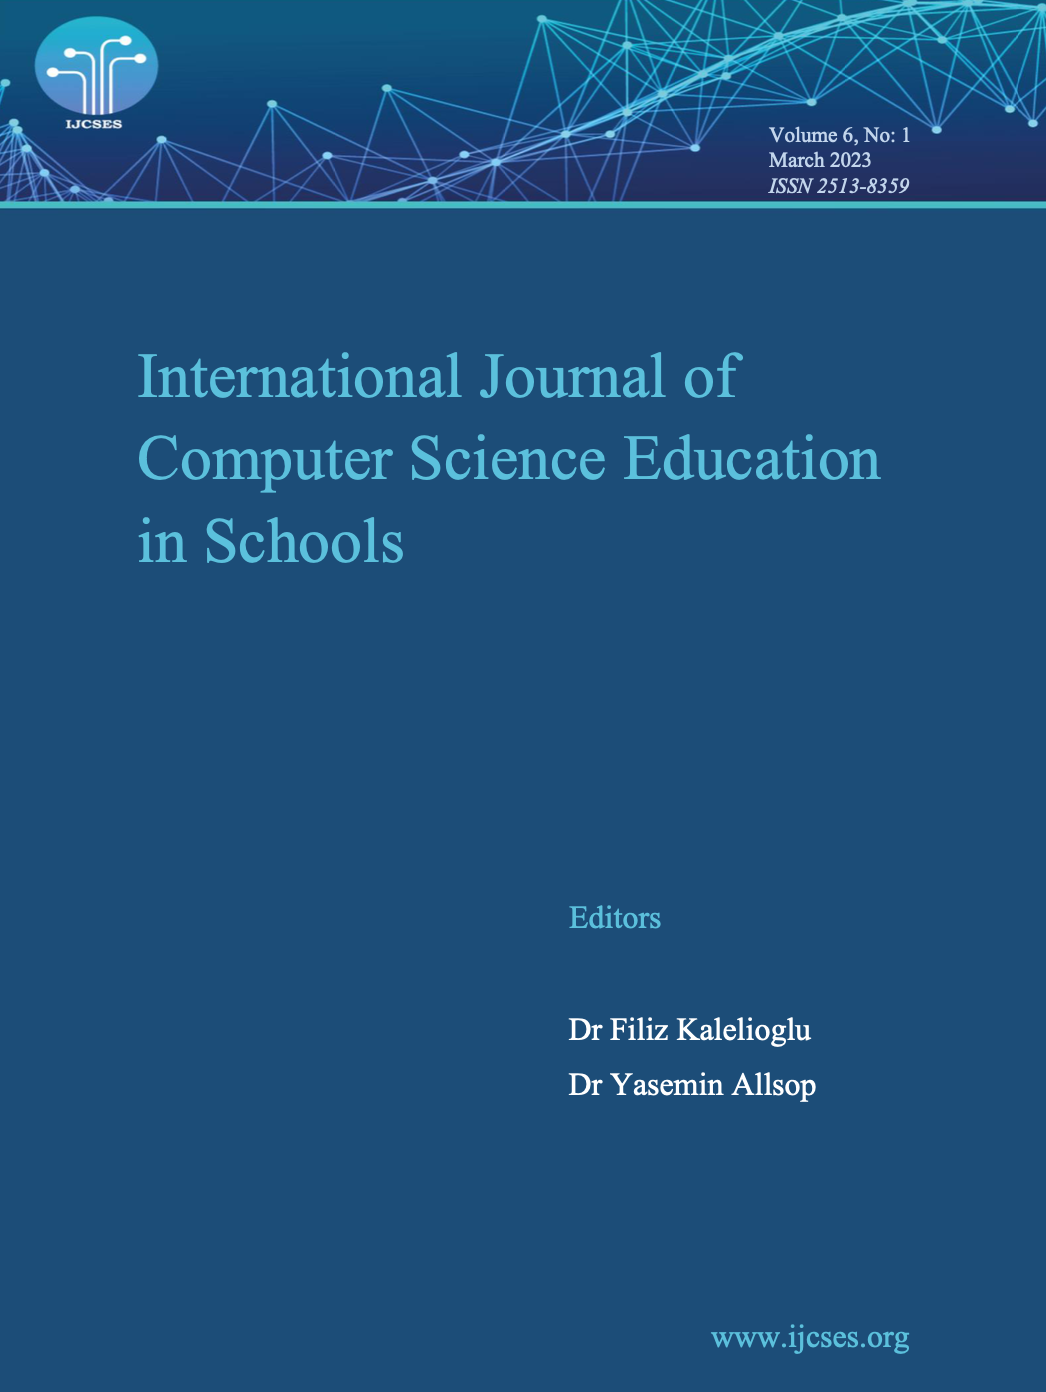 					View Vol. 6 No. 1 (2023): International Journal of Computer Science Education in Schools
				